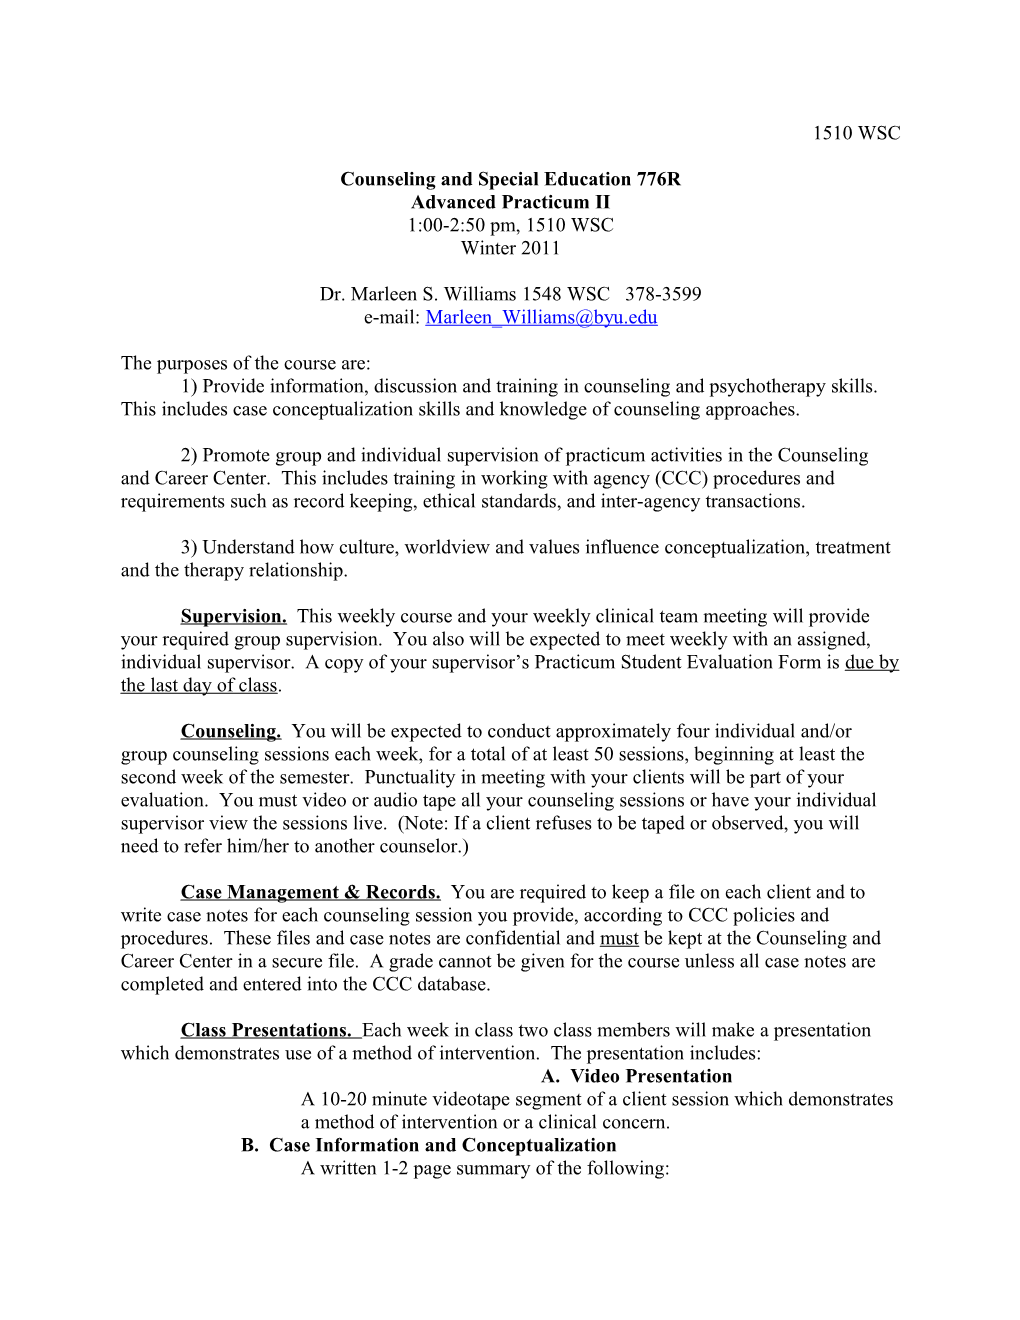 Counseling and Special Education 776R